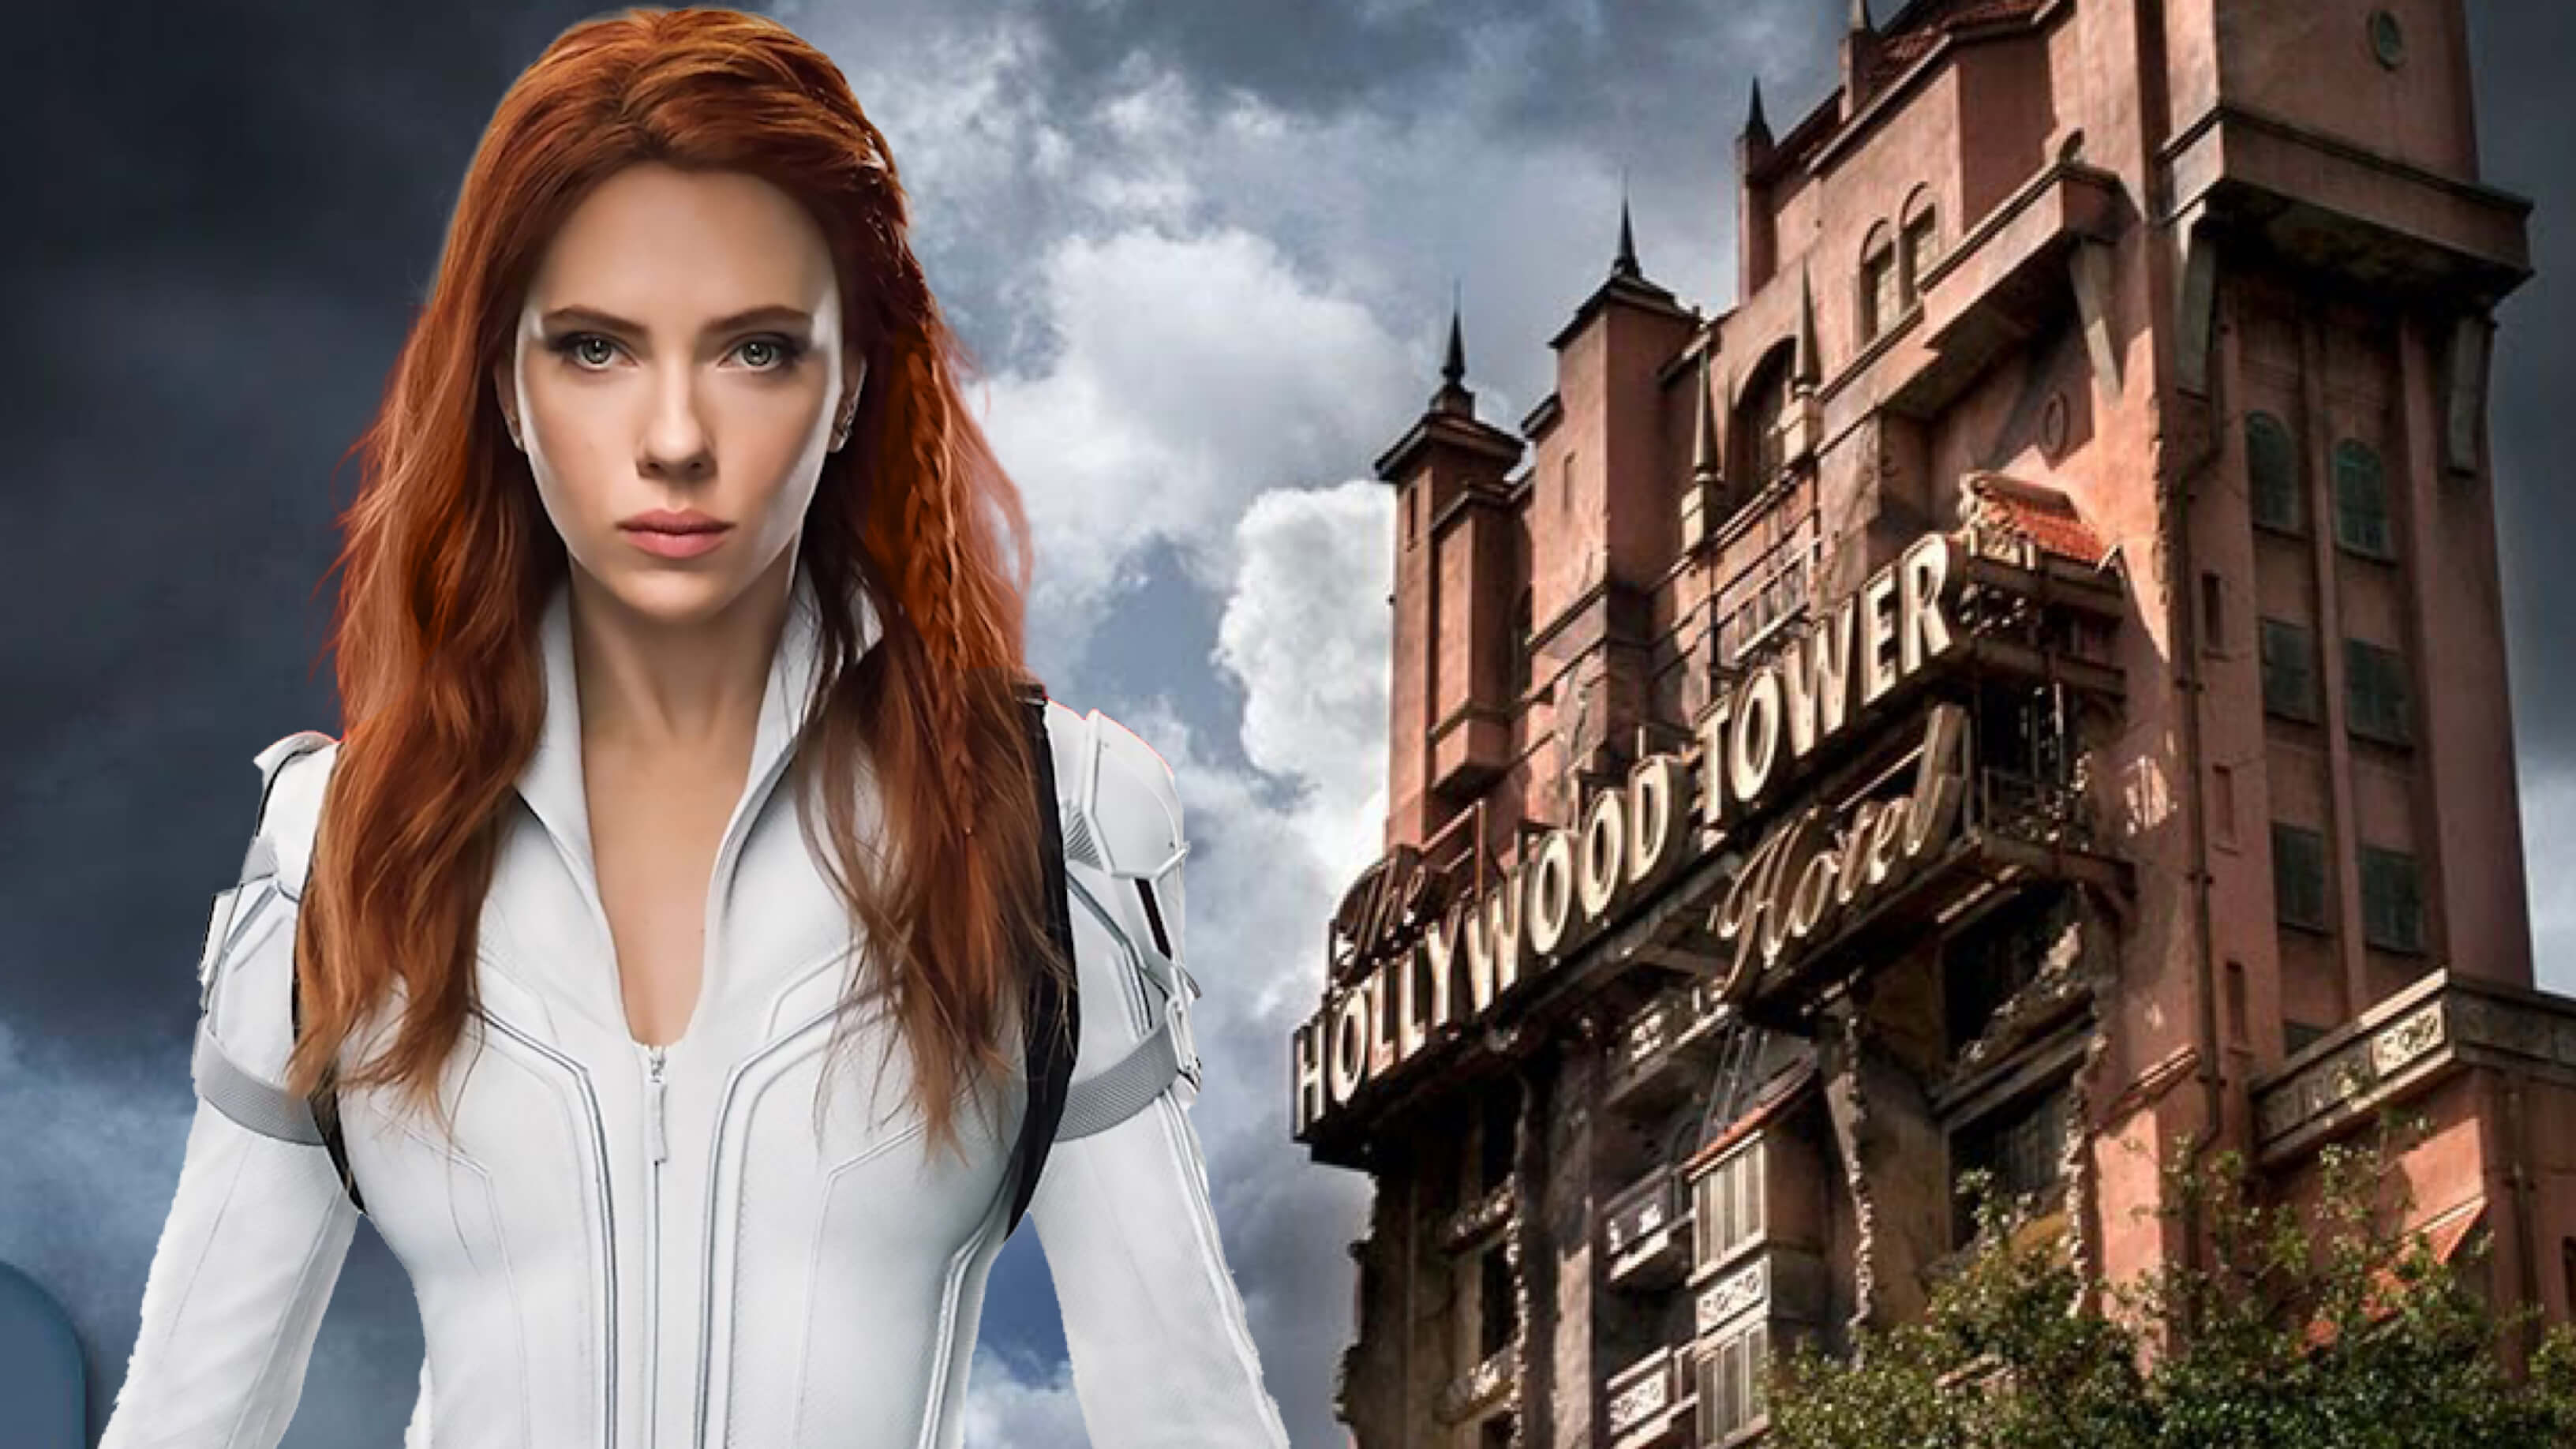 Scarlett Johansson to Produce and Star in Disney’s New ‘Tower Of Terror’ Film